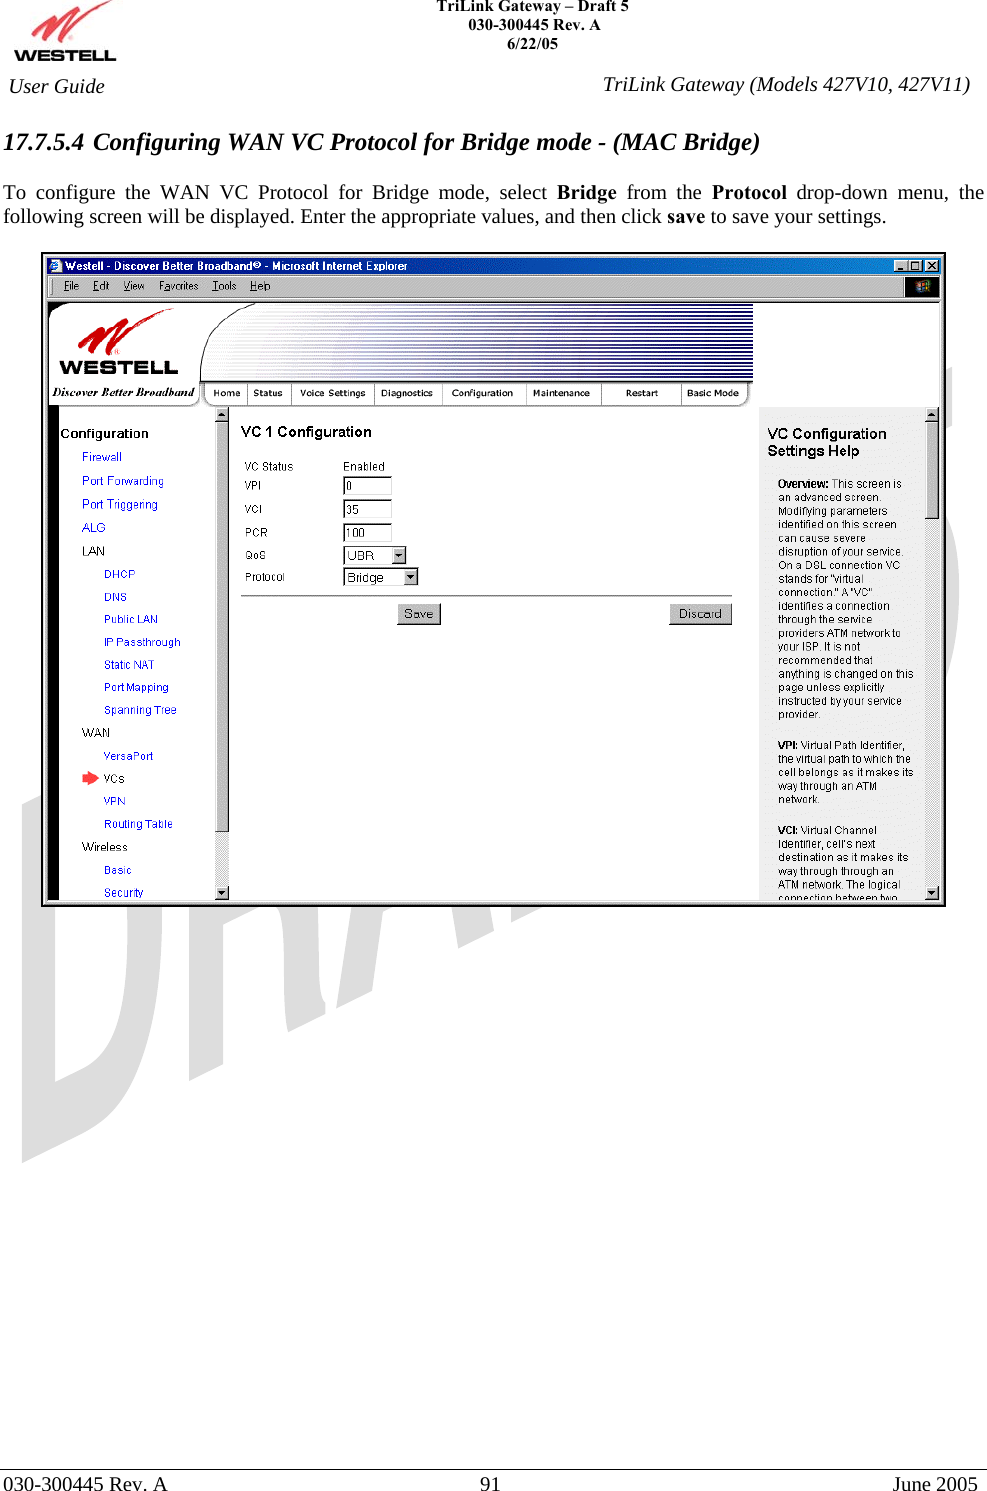    TriLink Gateway – Draft 5   030-300445 Rev. A 6/22/05   030-300445 Rev. A  91  June 2005  User Guide  TriLink Gateway (Models 427V10, 427V11)17.7.5.4 Configuring WAN VC Protocol for Bridge mode - (MAC Bridge)  To configure the WAN VC Protocol for Bridge mode, select Bridge  from the Protocol drop-down menu, the following screen will be displayed. Enter the appropriate values, and then click save to save your settings.                        